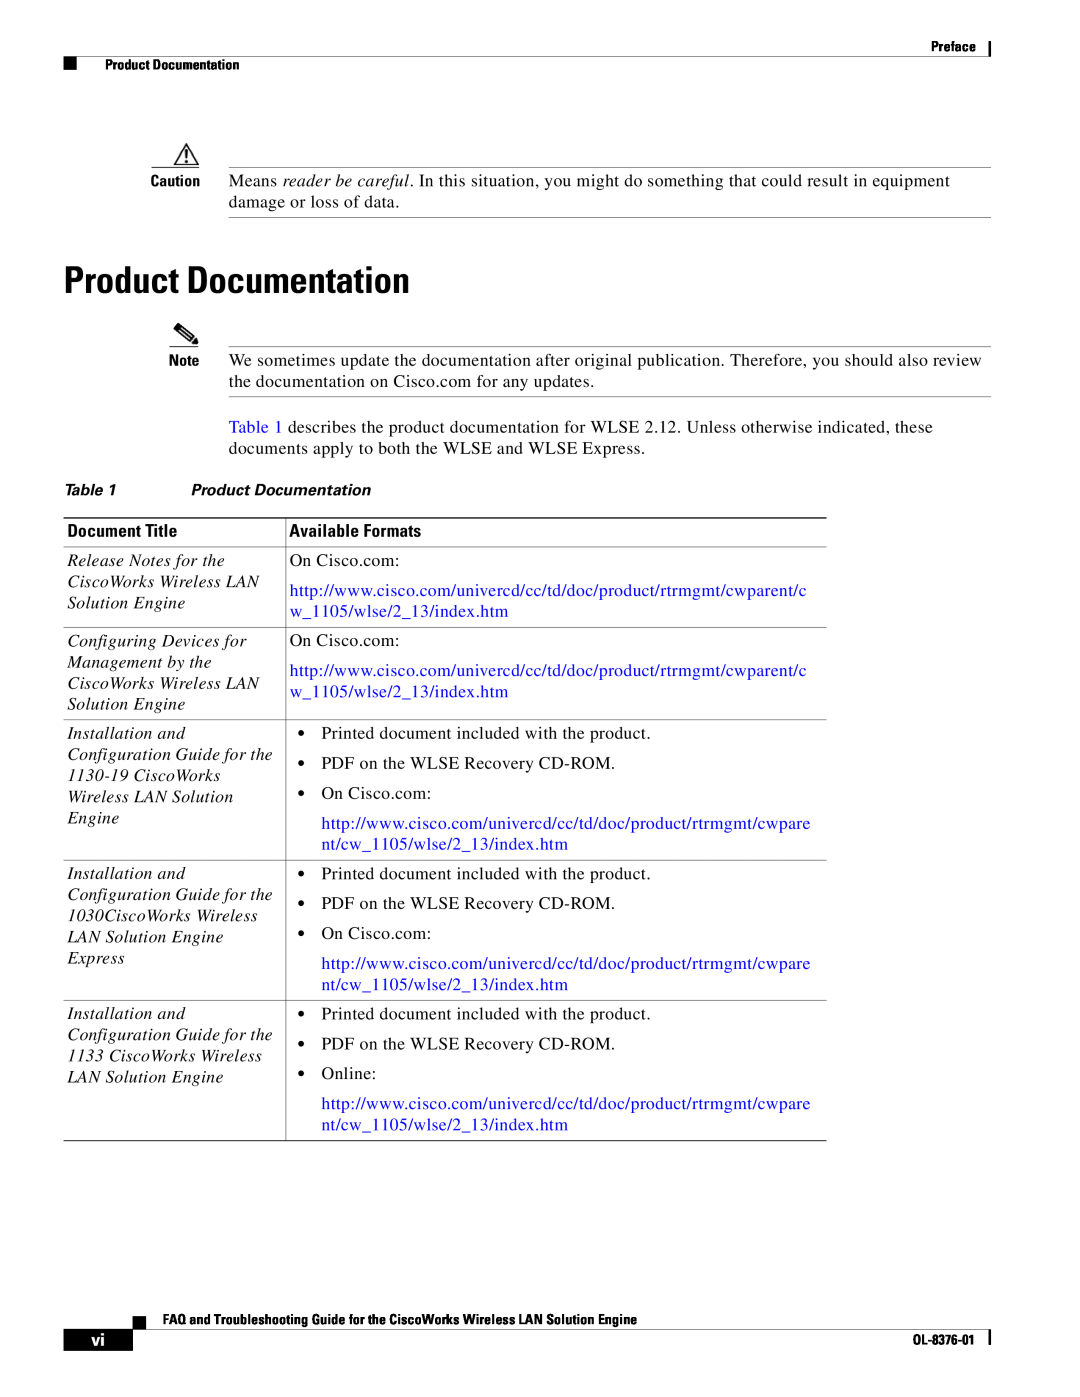 Cisco Systems OL-8376-01 manual Product Documentation, Available Formats 